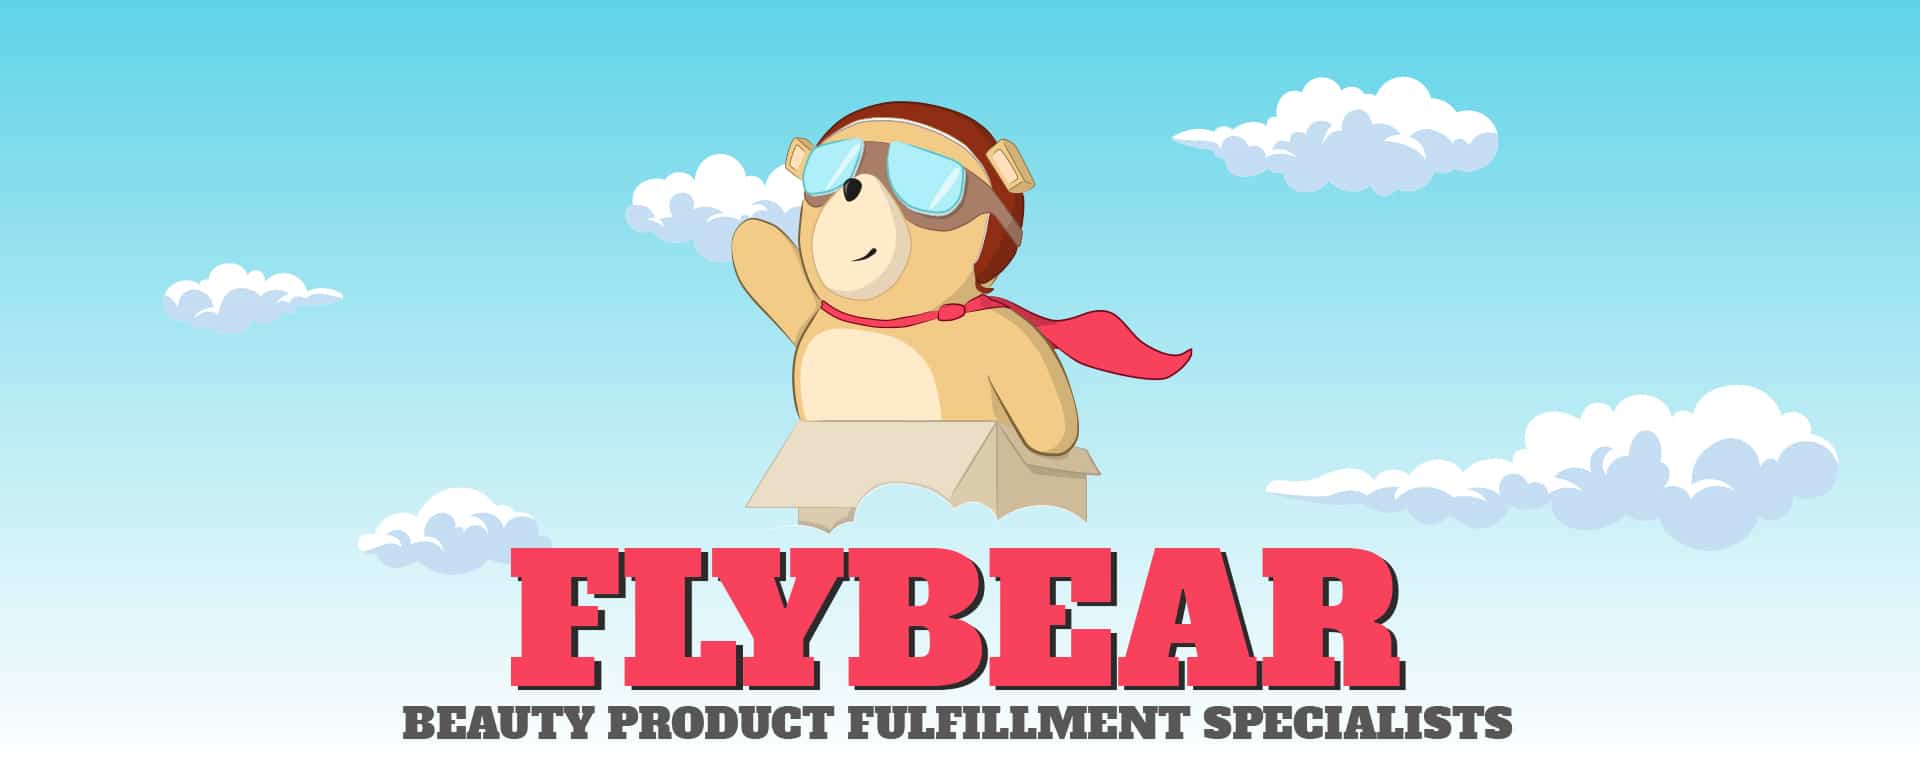 Flybear Beauty Product Fulfillment Specialists